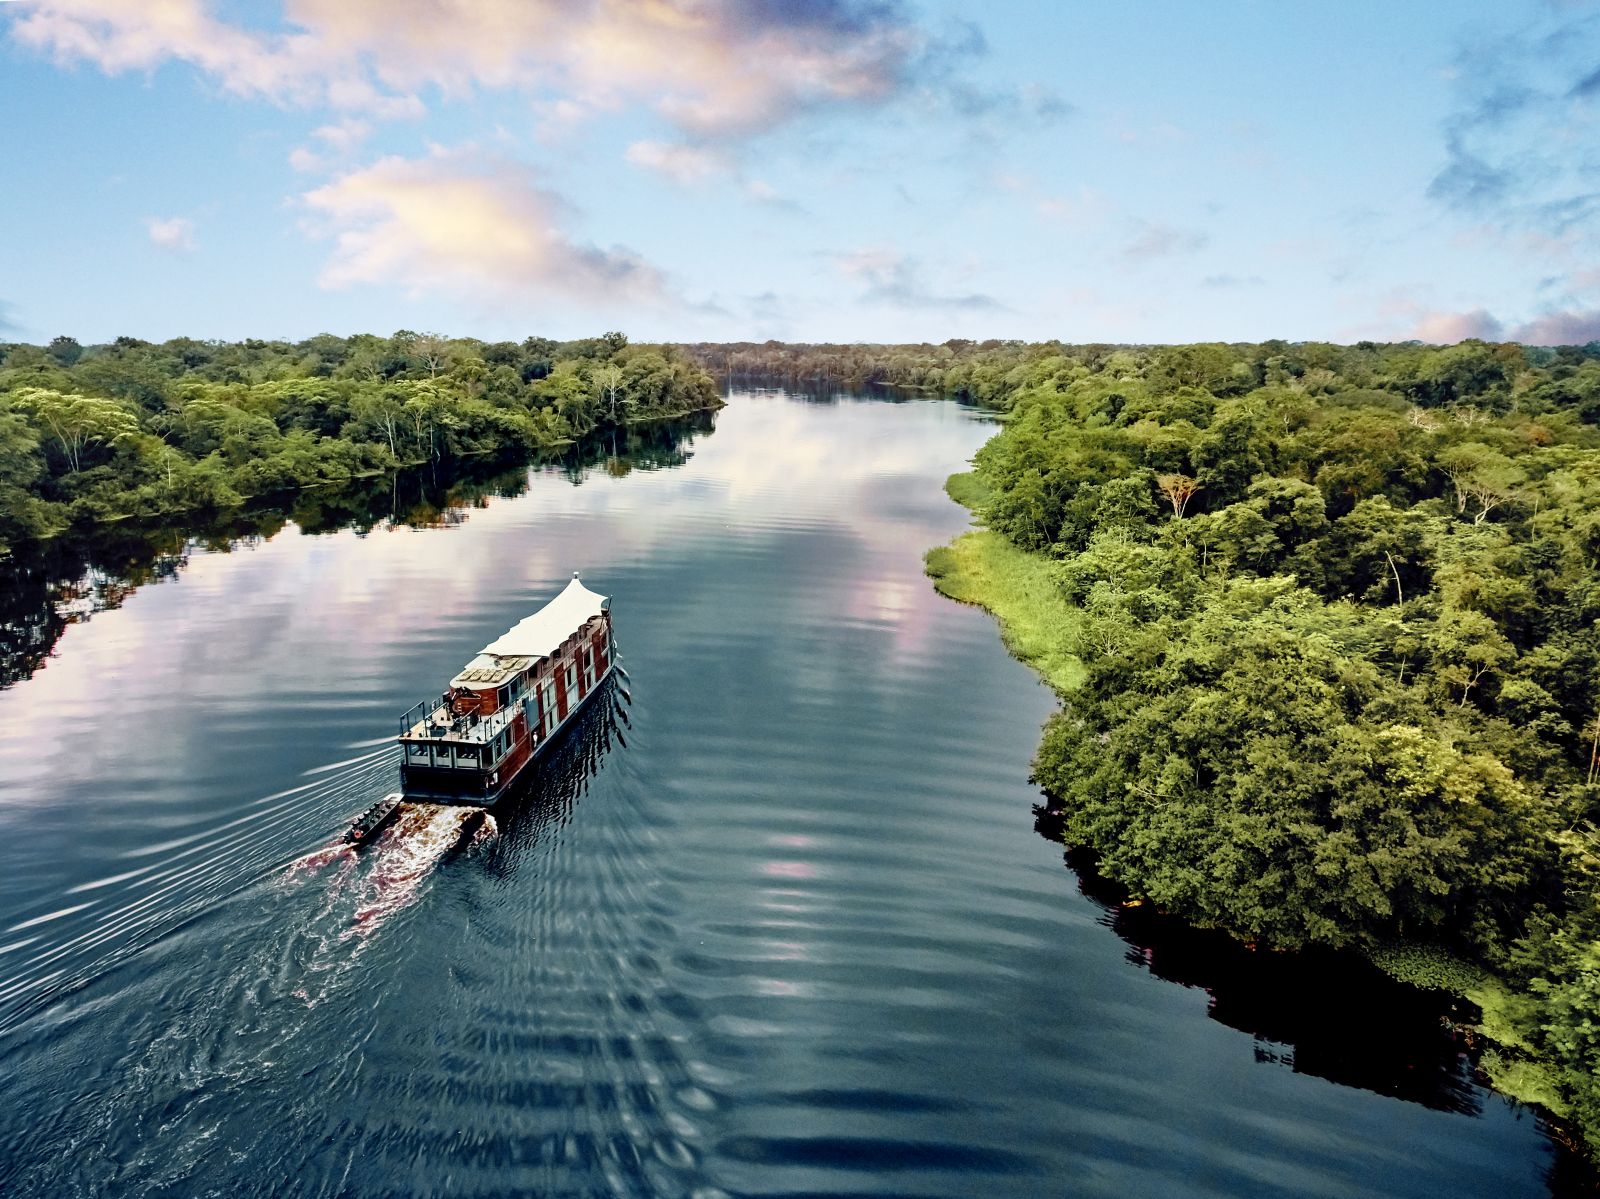 River cruise on the Amazon